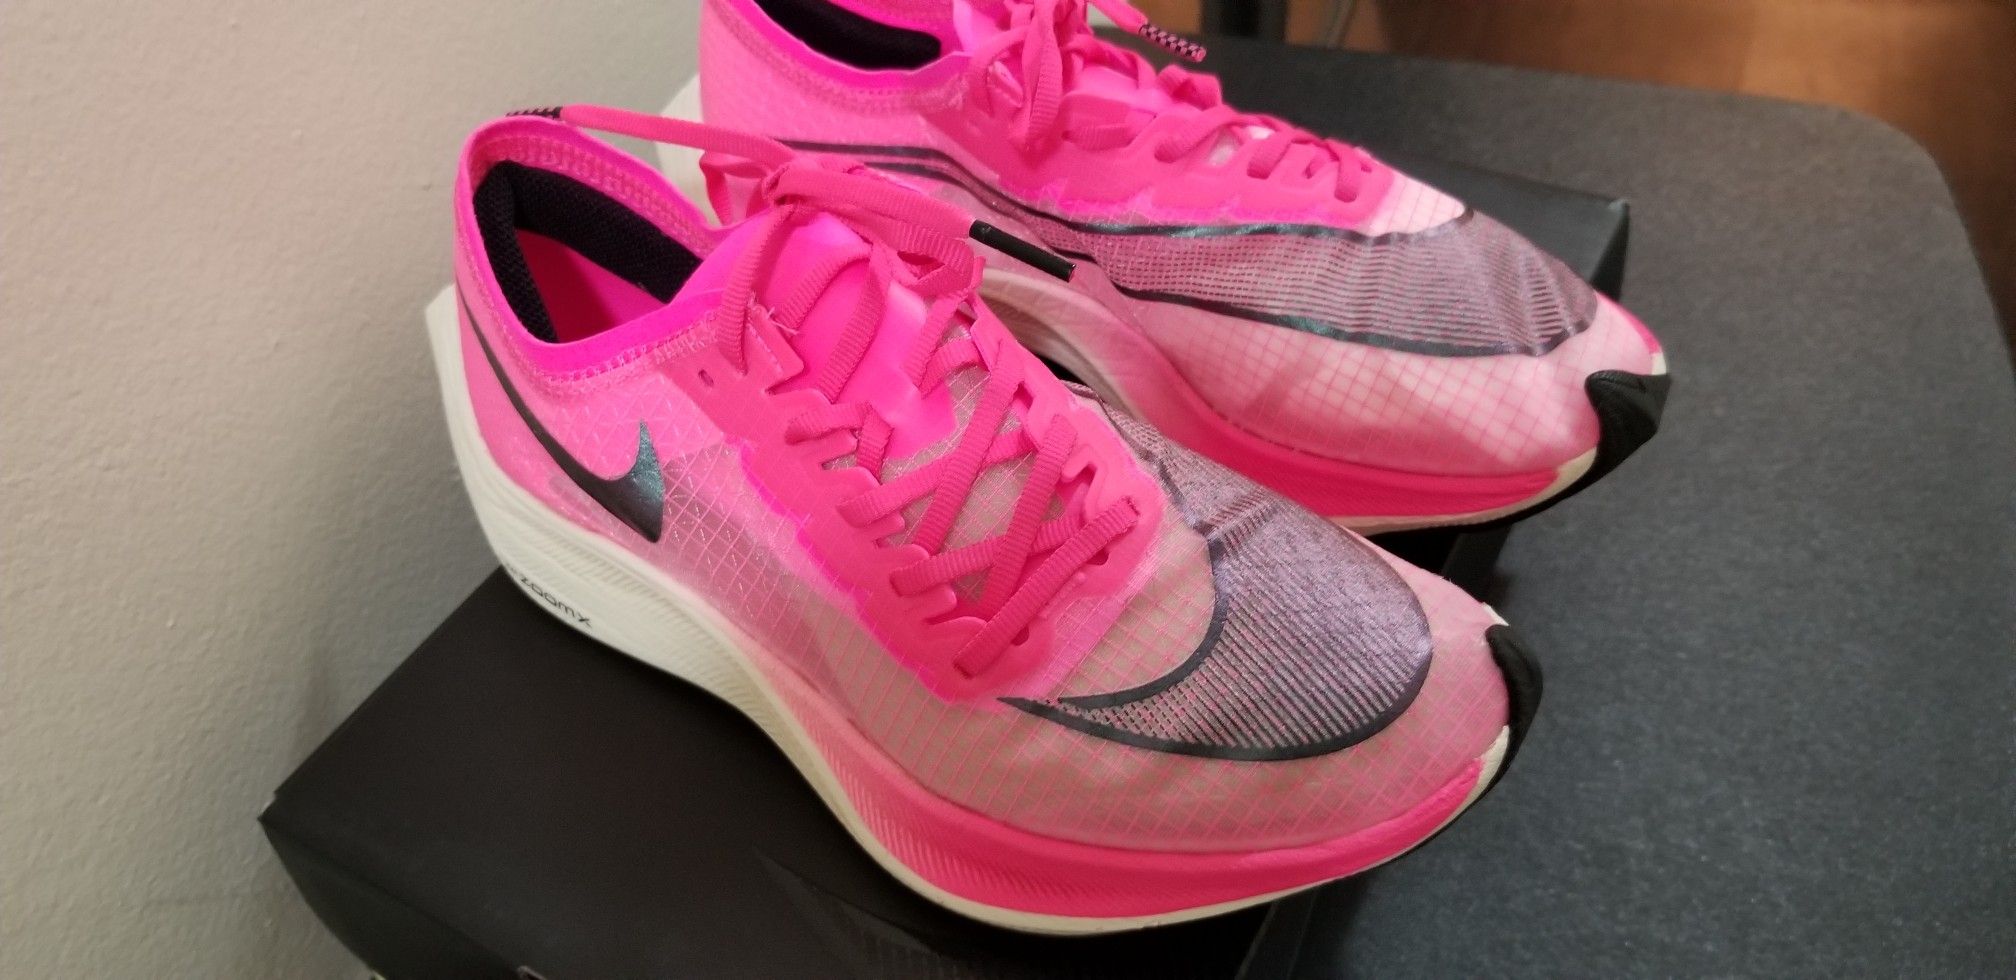 Nike ZoomX Vaporfly Next% - Pink